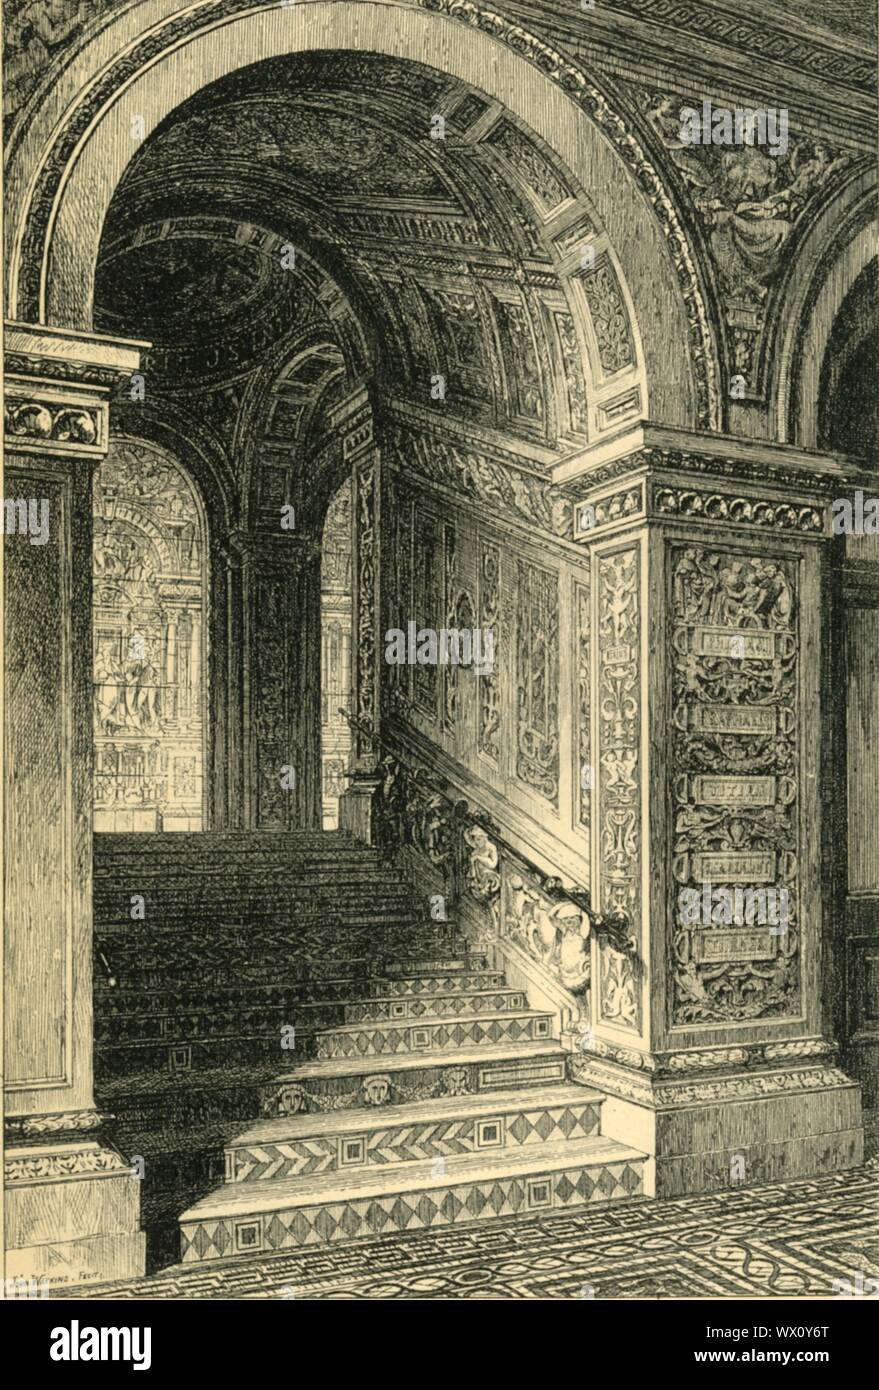 'West Staircase, Leading to the Ceramic Gallery', c1876, (1881). The West Staircase in the South Kensington Museum, decorated with Frank Moody's ceramic tile mosaic pavement, with majolica panels on the walls. Five panels on the right bear the inscriptions 'PHIDIAS', 'RAPHAEL', 'TITIAN', 'REMBRANDT' and 'TURNER'. The Della Robbia ware, a modern version of a Renaissance technique, was produced by the English ceramic company Minton, Hollins &amp; Co. From &quot;The South Kensington Museum&quot;, a book of engraved illustrations, with descriptions, of the works of art in the collection of the Vic Stock Photo